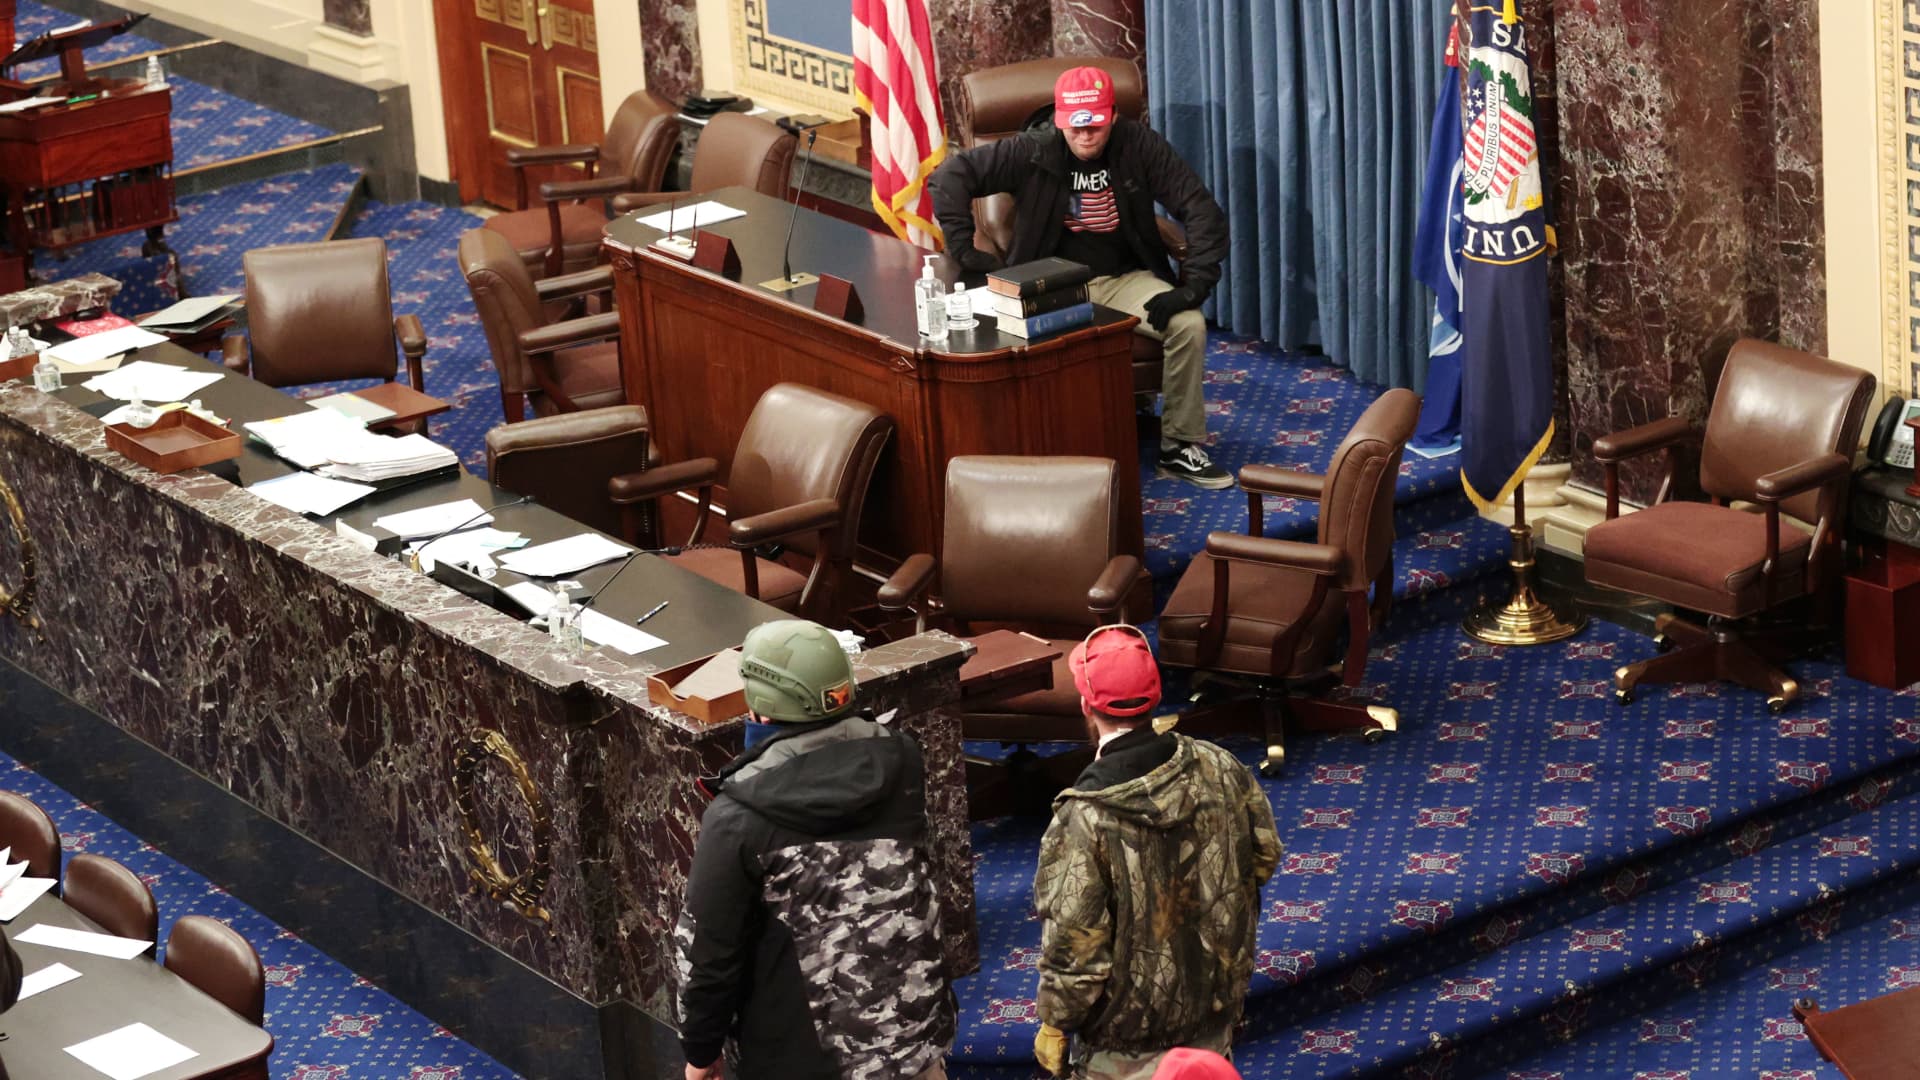 Protesters enter the Senate Chamber on January 06, 2021 in Washington, DC. Congress held a joint session today to ratify President-elect Joe Biden's 306-232 Electoral College win over President Donald Trump.